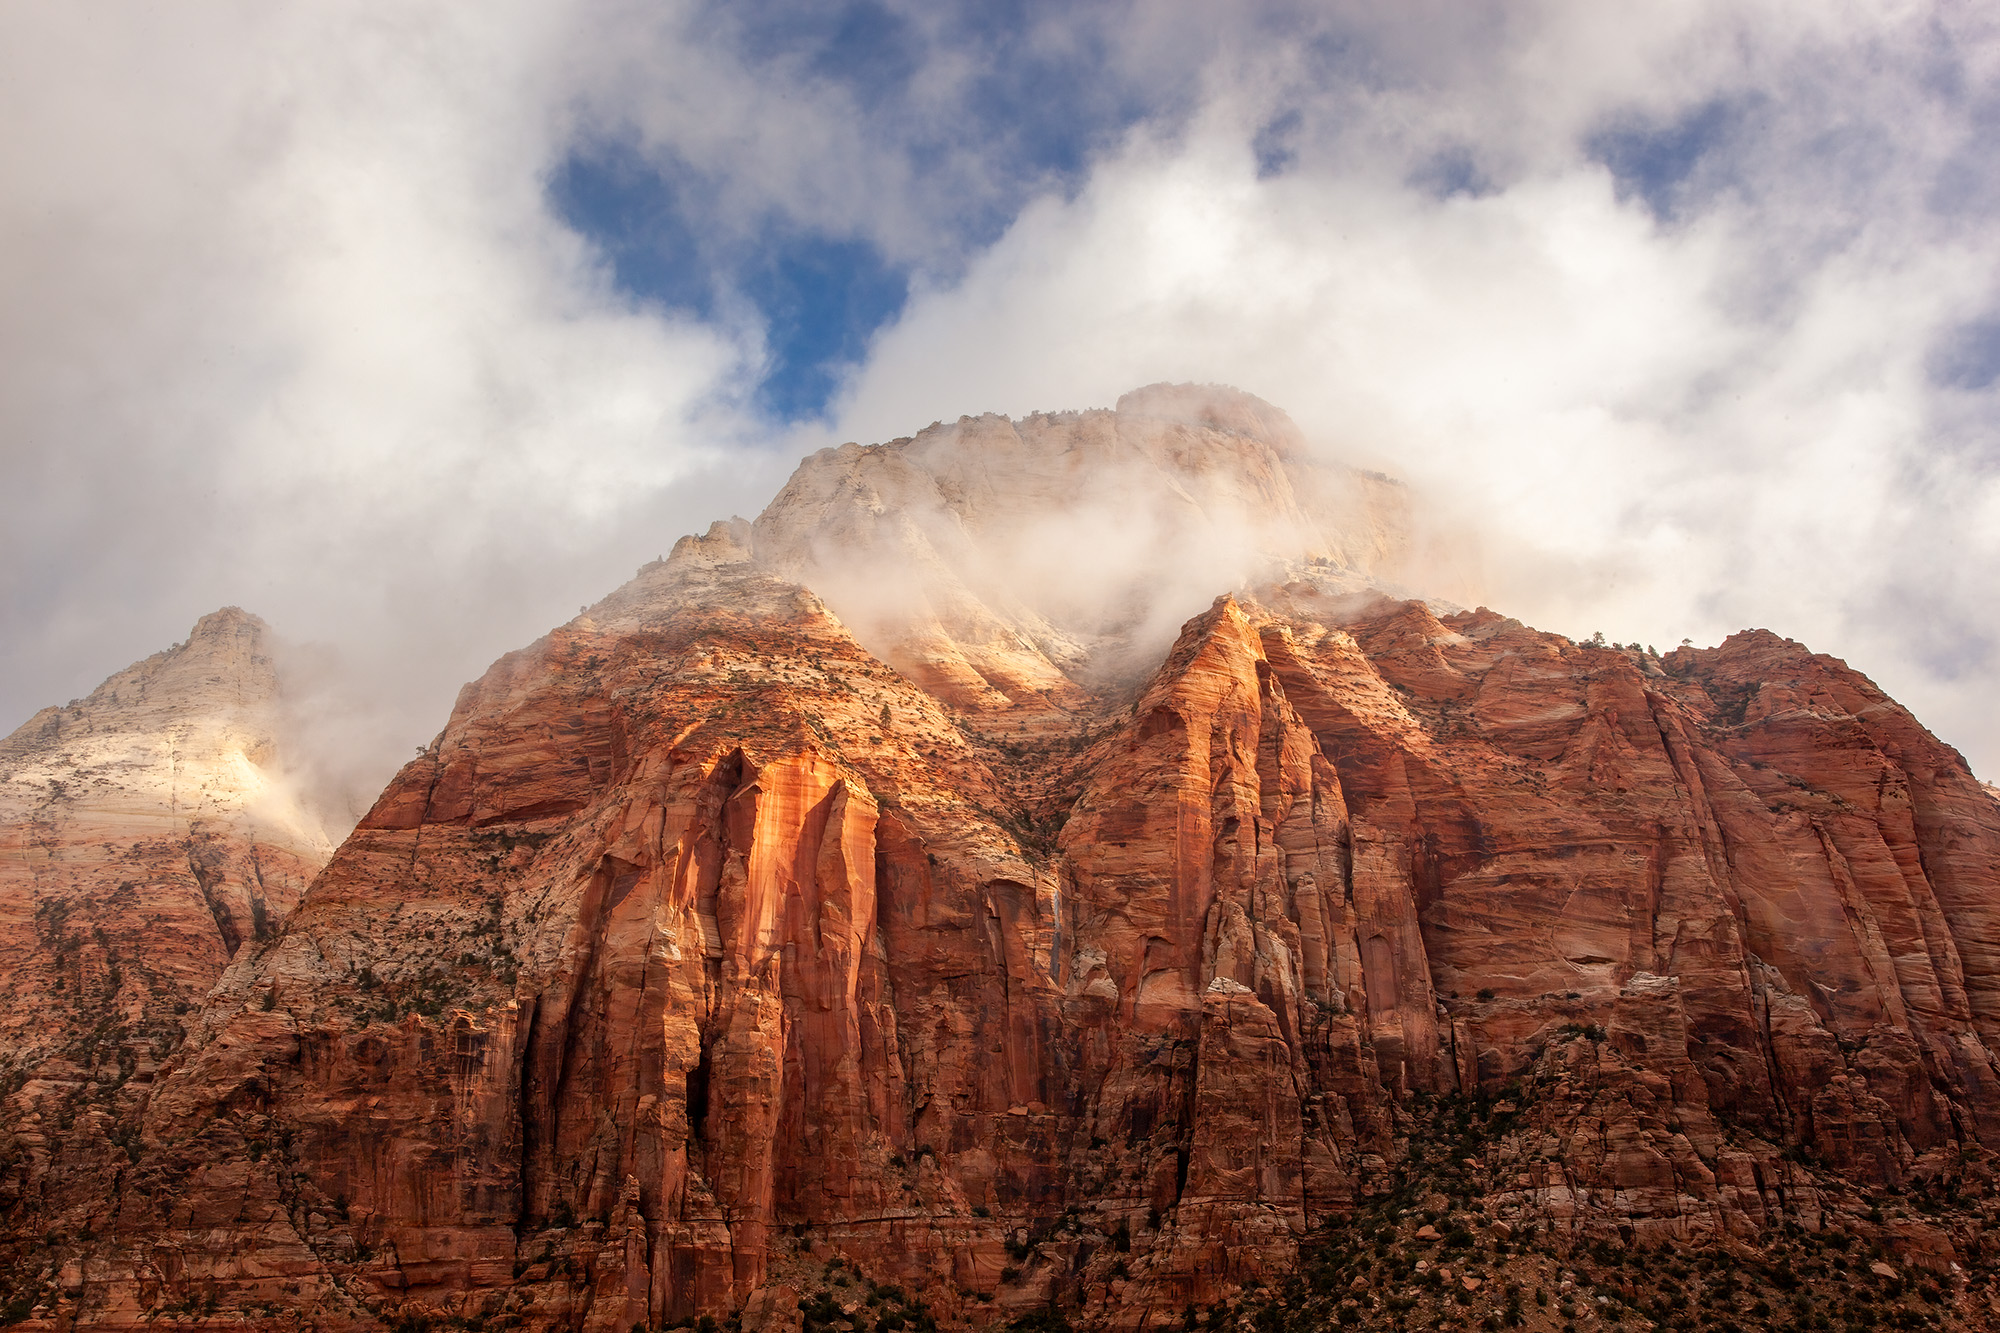 From the vantage of East Temple in Zion National Park, the sandstone walls take center stage, bathed in warm radiance. An enigmatic...